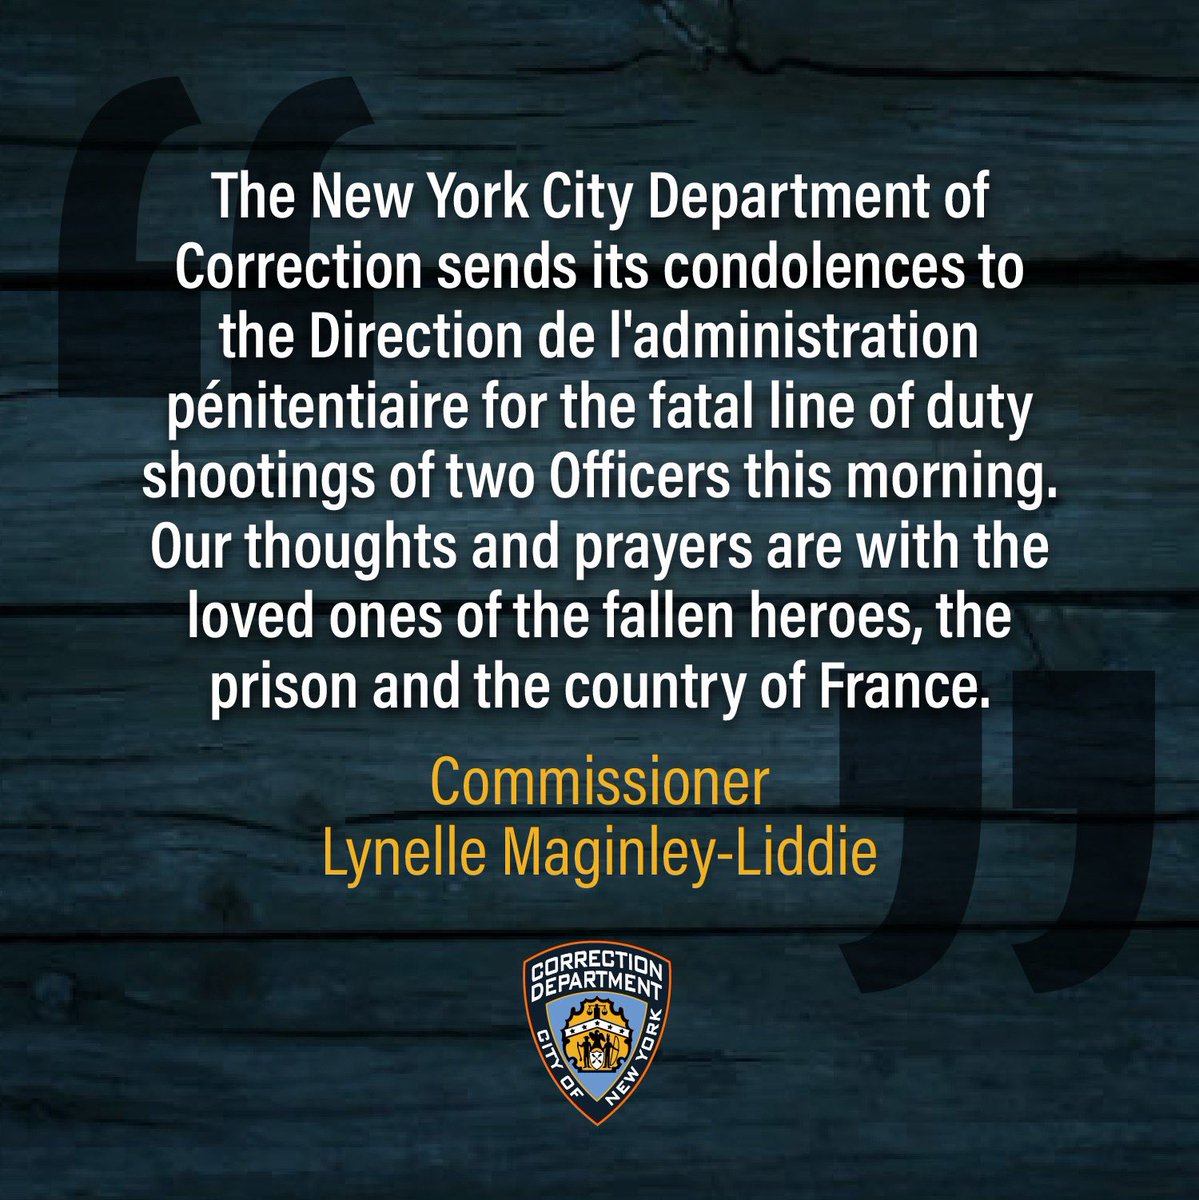 Read my statement below in regards to this morning’s fatal line of duty shooting of two Direction de l’administration pénitentiaire Officers in France.